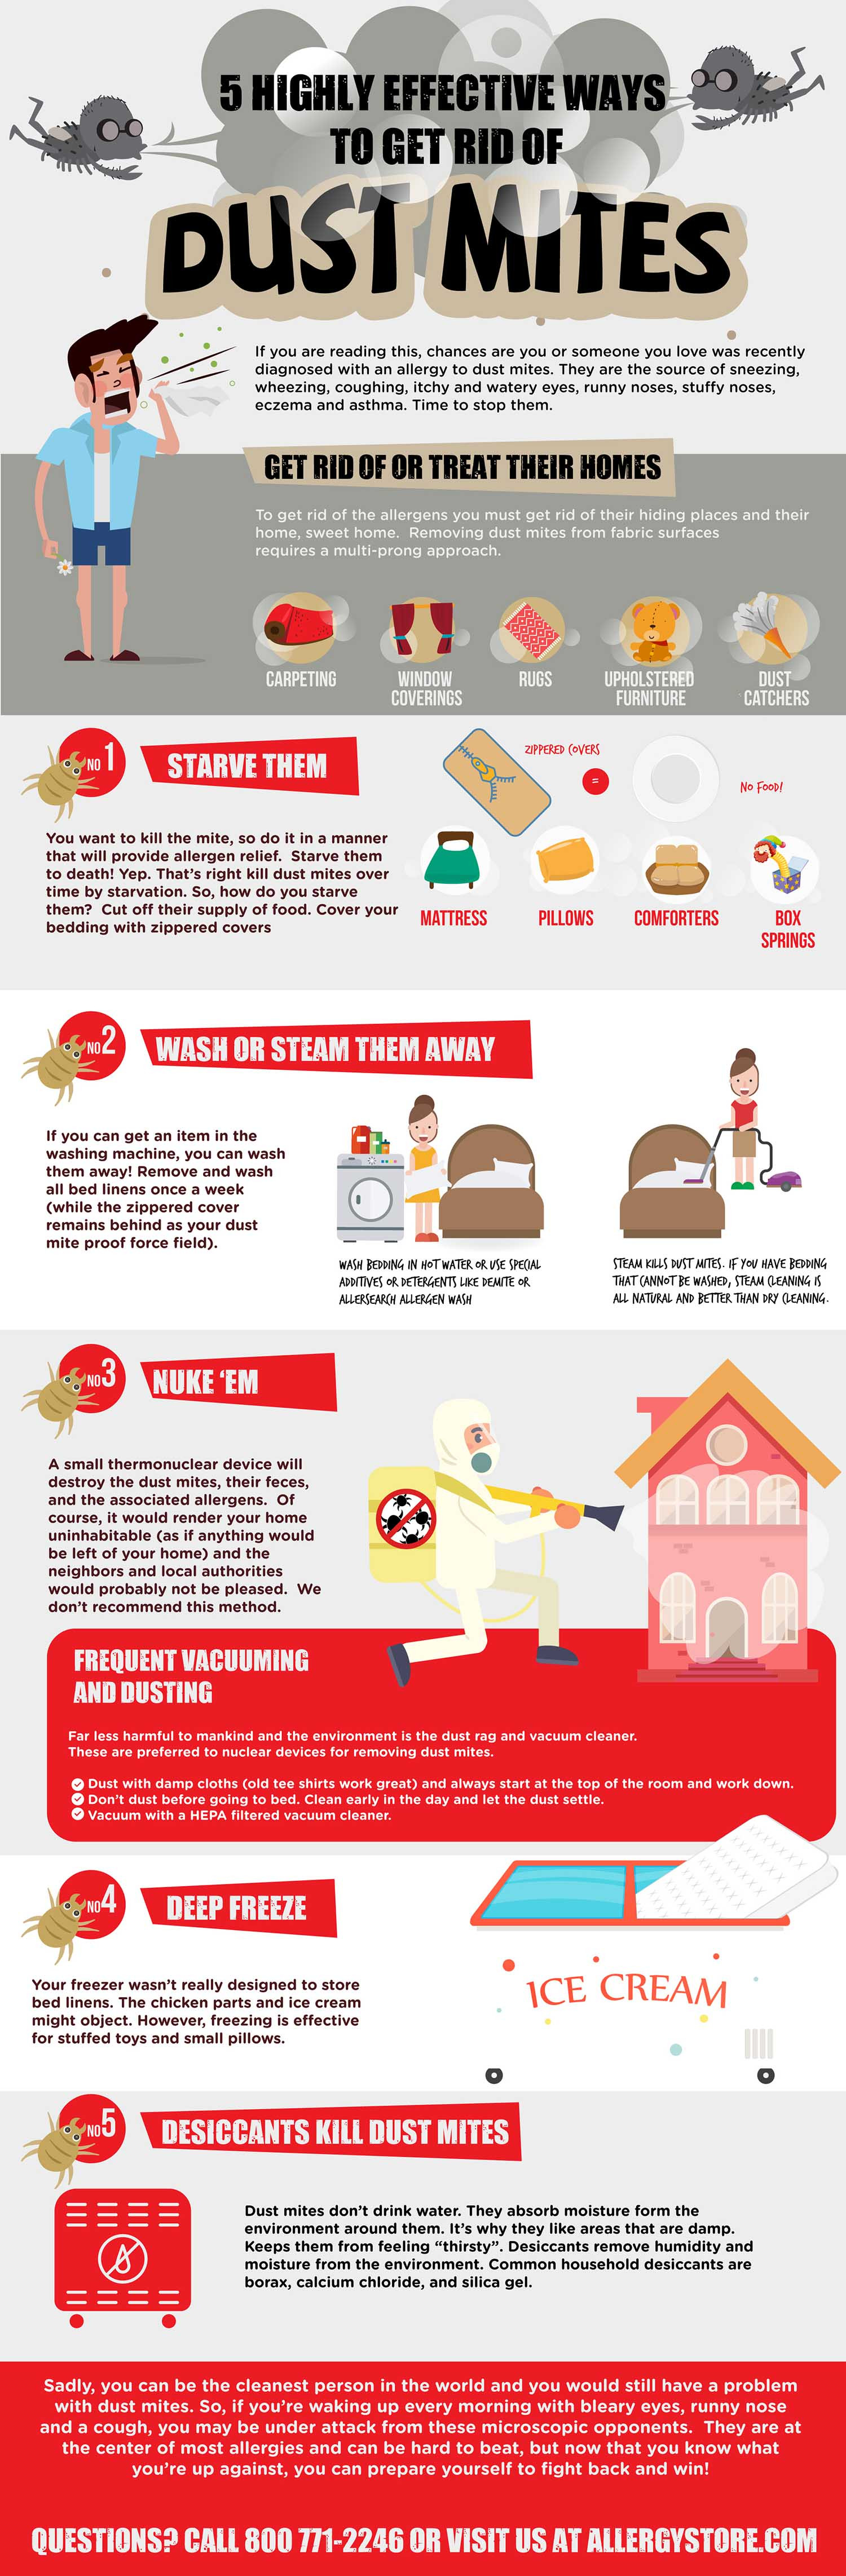 5 Highly Effective Ways to Get Rid of Dust Mites Infographic